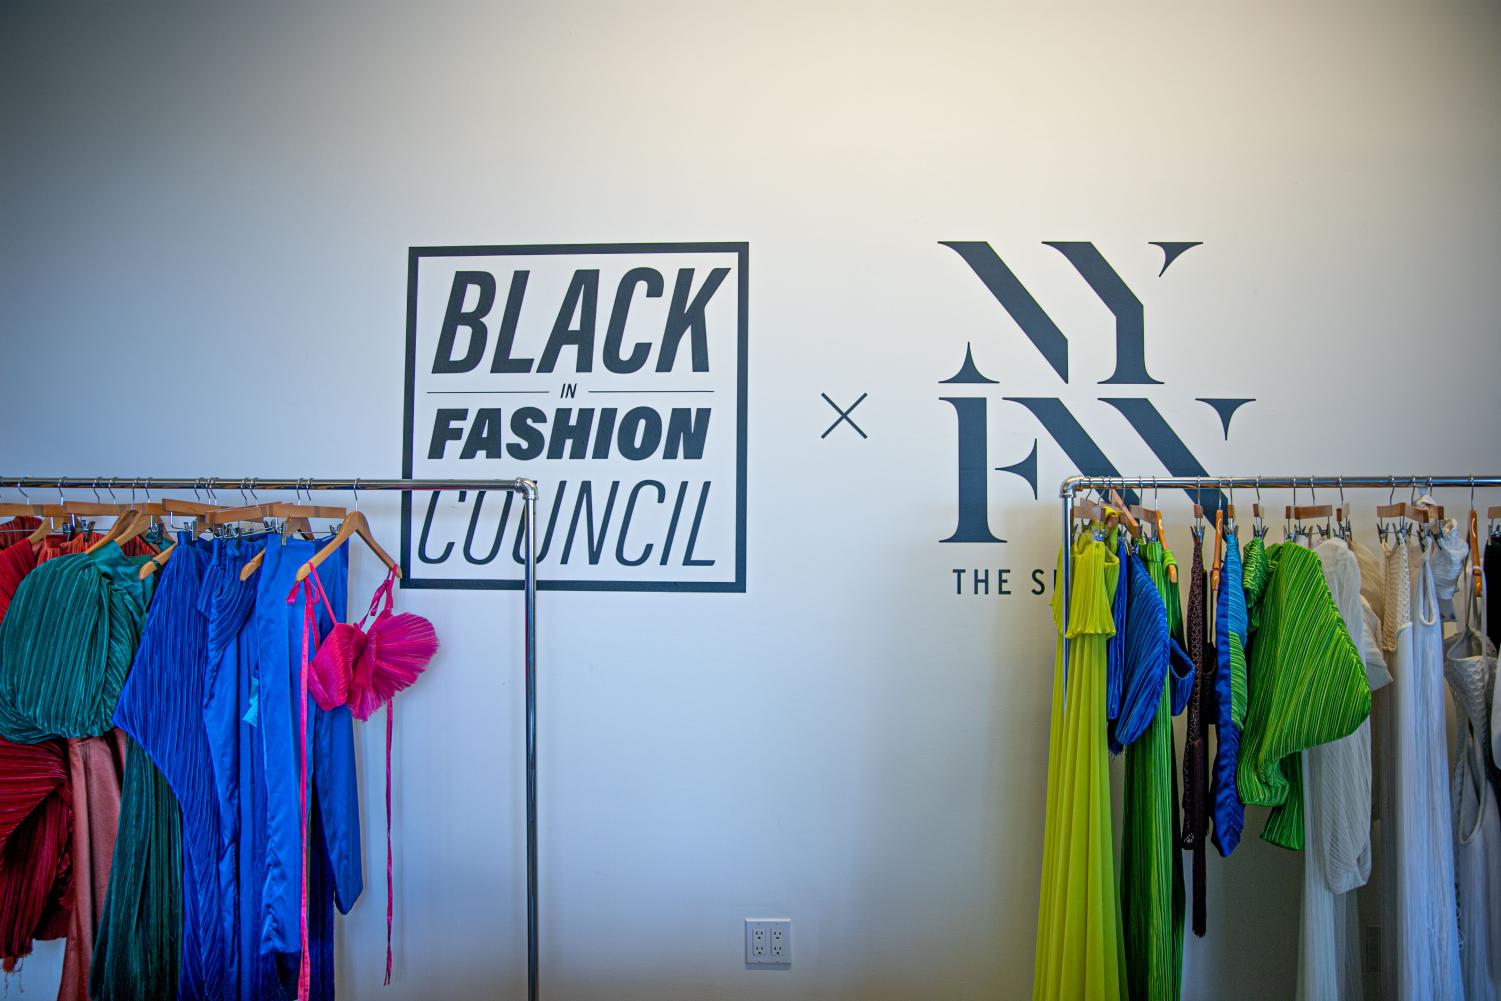 Black+in+Fashion+Council+showroom+spotlights+new+Black+talent+and+sustainability